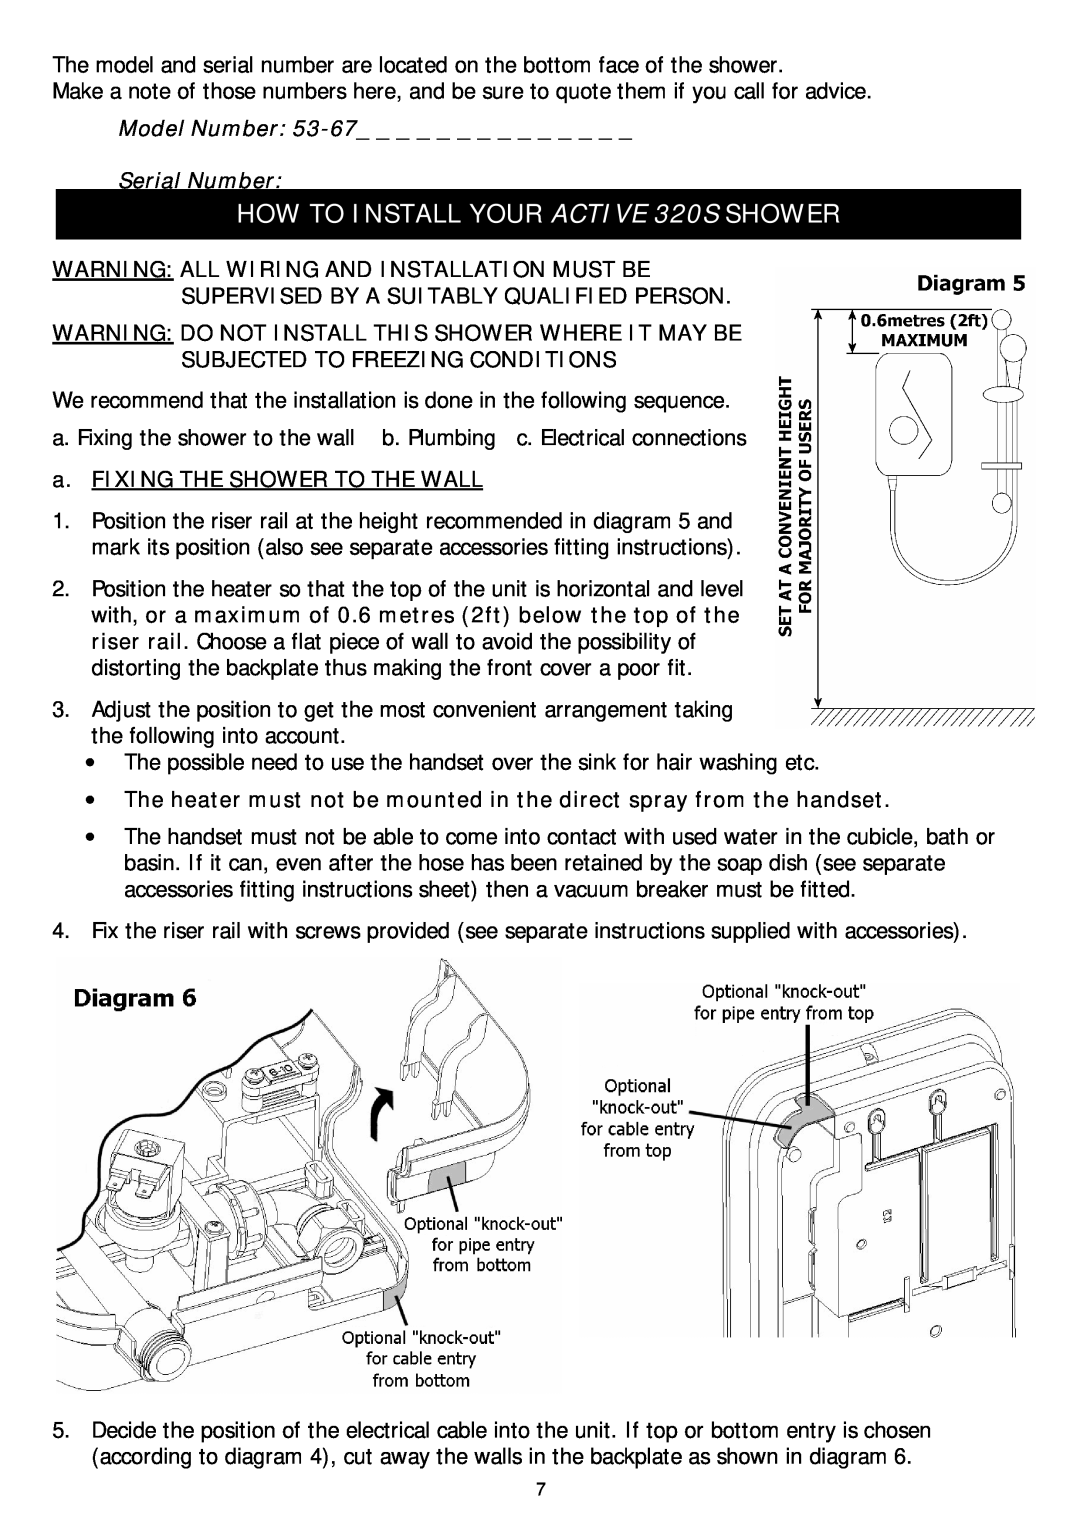 Redring manual HOW TO INSTALL YOUR ACTIVE 320S SHOWER, Warning All Wiring And Installation Must Be 